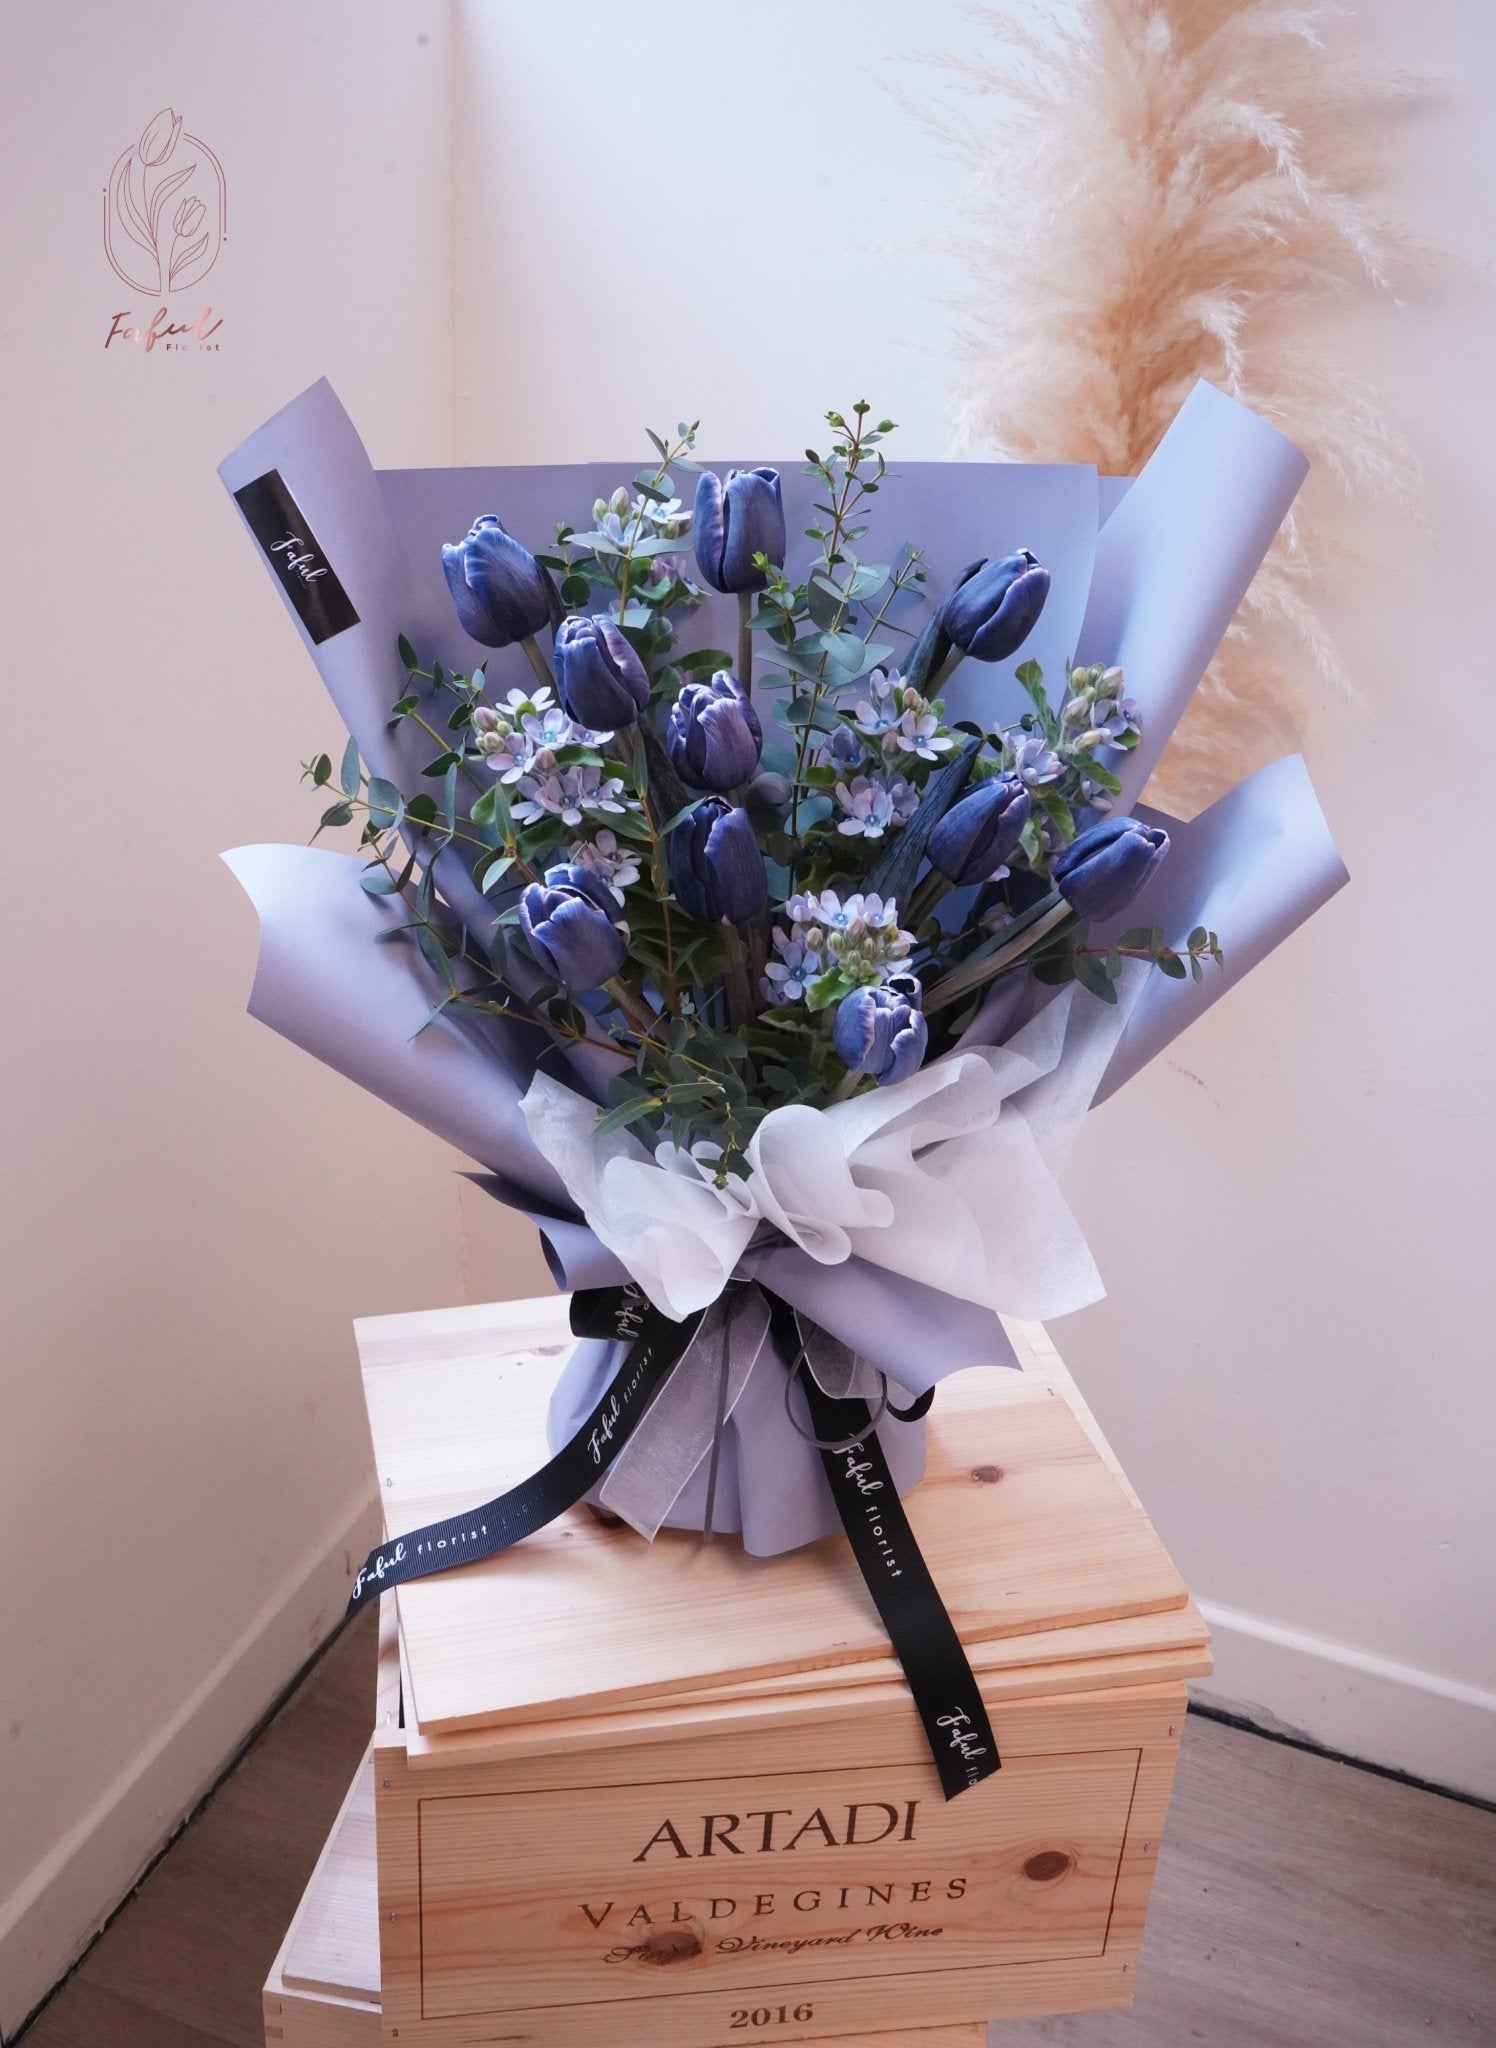 "Blue Violet Tulip Flowers with Tweedia" - An enchanting arrangement combining blue-violet tulips and Tweedia, perfect flowers for flower delivery in Hong Kong.